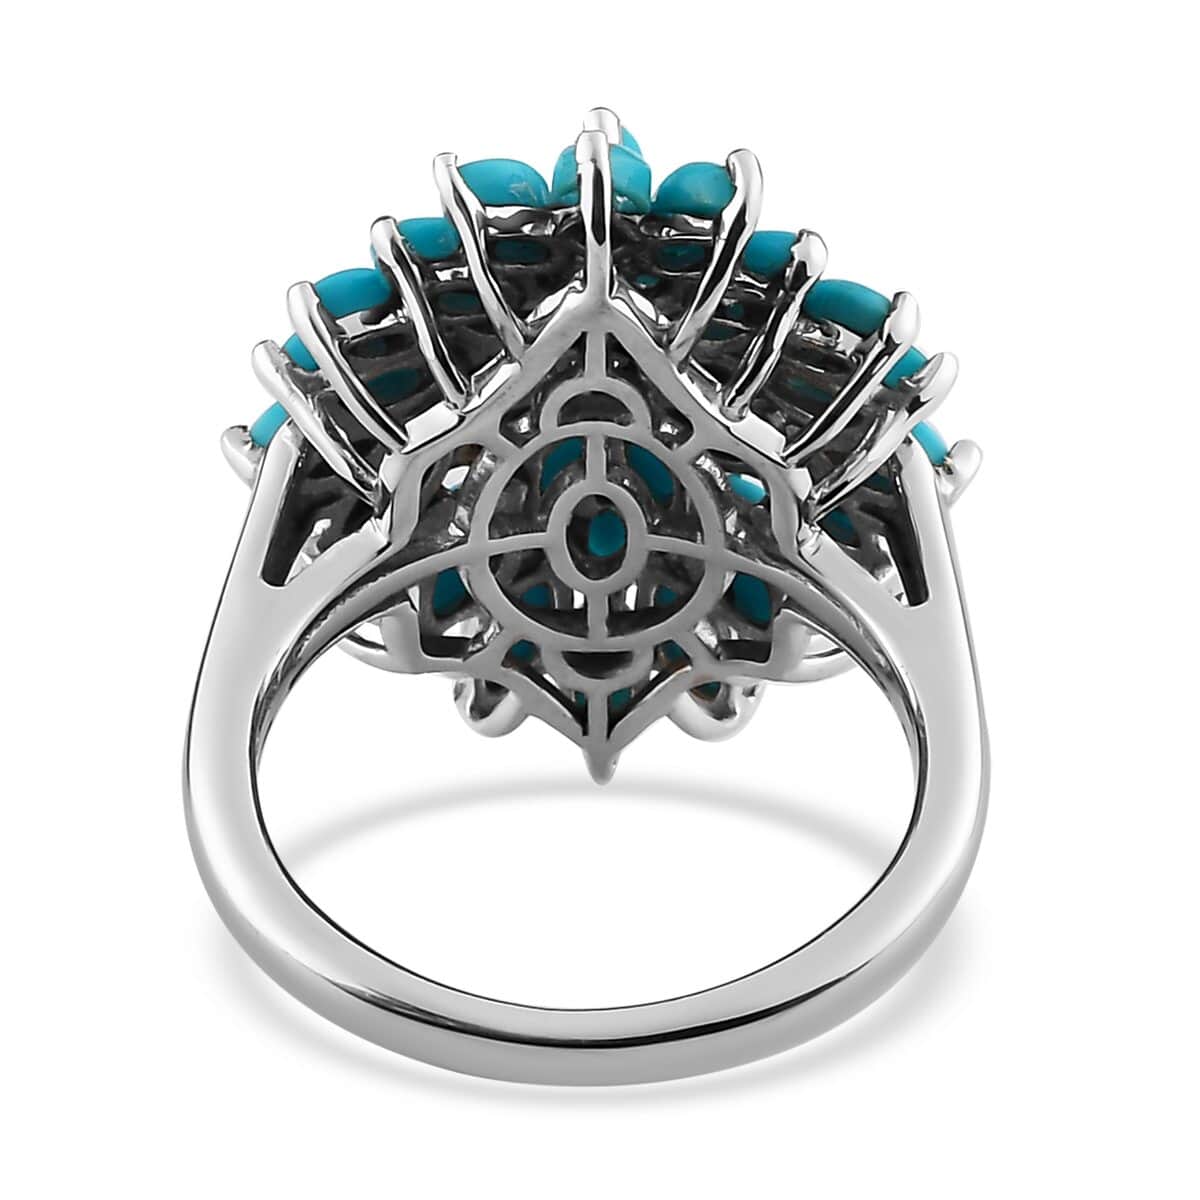 doorbuster-american-natural-sleeping-beauty-turquoise-floral-spray-ring-in-platinum-over-sterling-silver-size-10.0-3.75-ctw image number 4